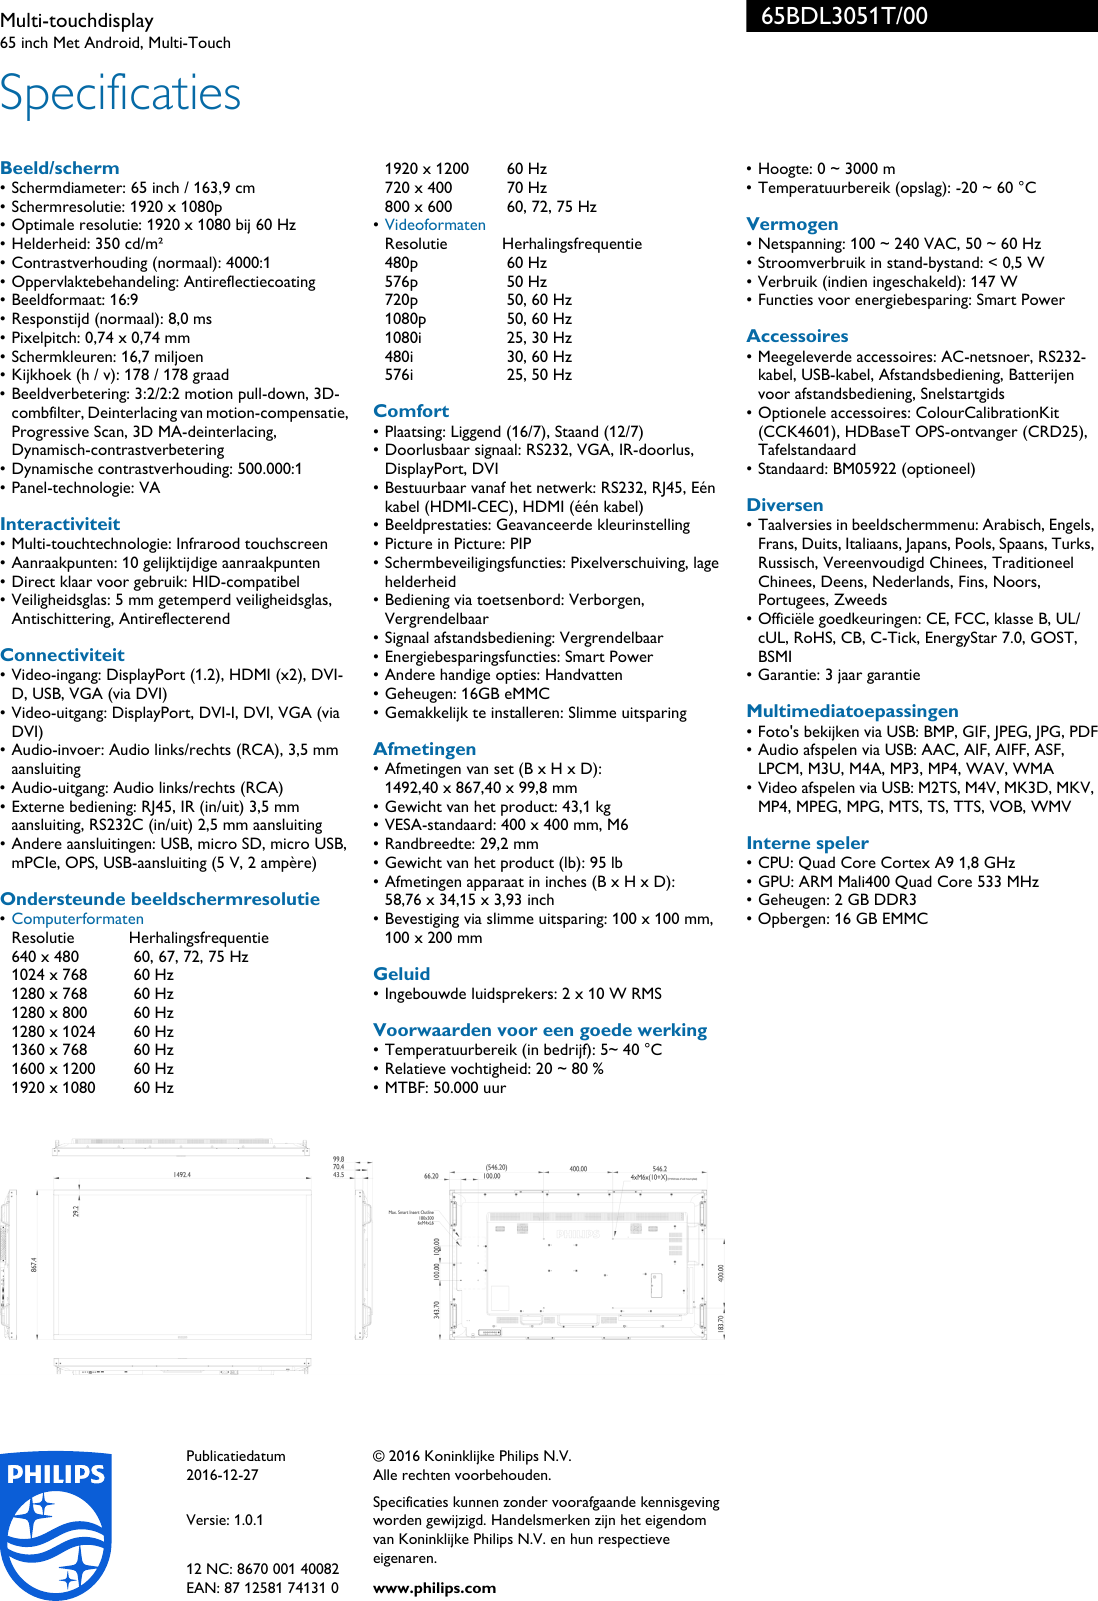 Page 3 of 3 - Philips 65BDL3051T/00 Multi-touchdisplay User Manual Brochure 65bdl3051t 00 Pss Nldnl